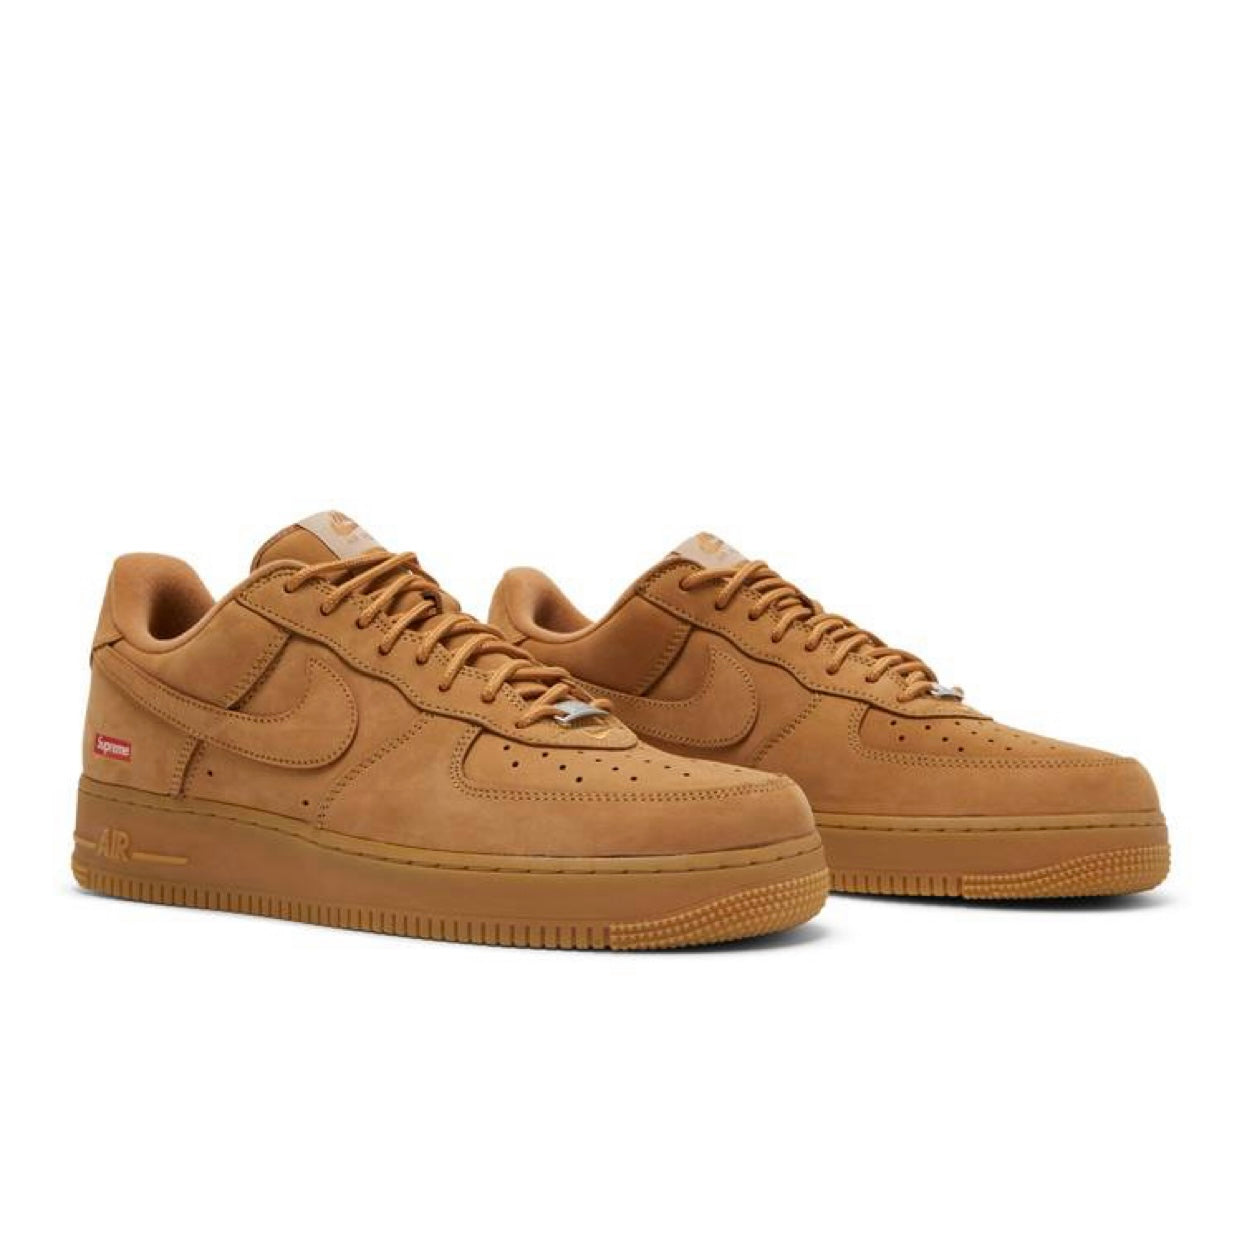 Nike Air Force 1 Low SP x Supreme, Wheat (Men’s)